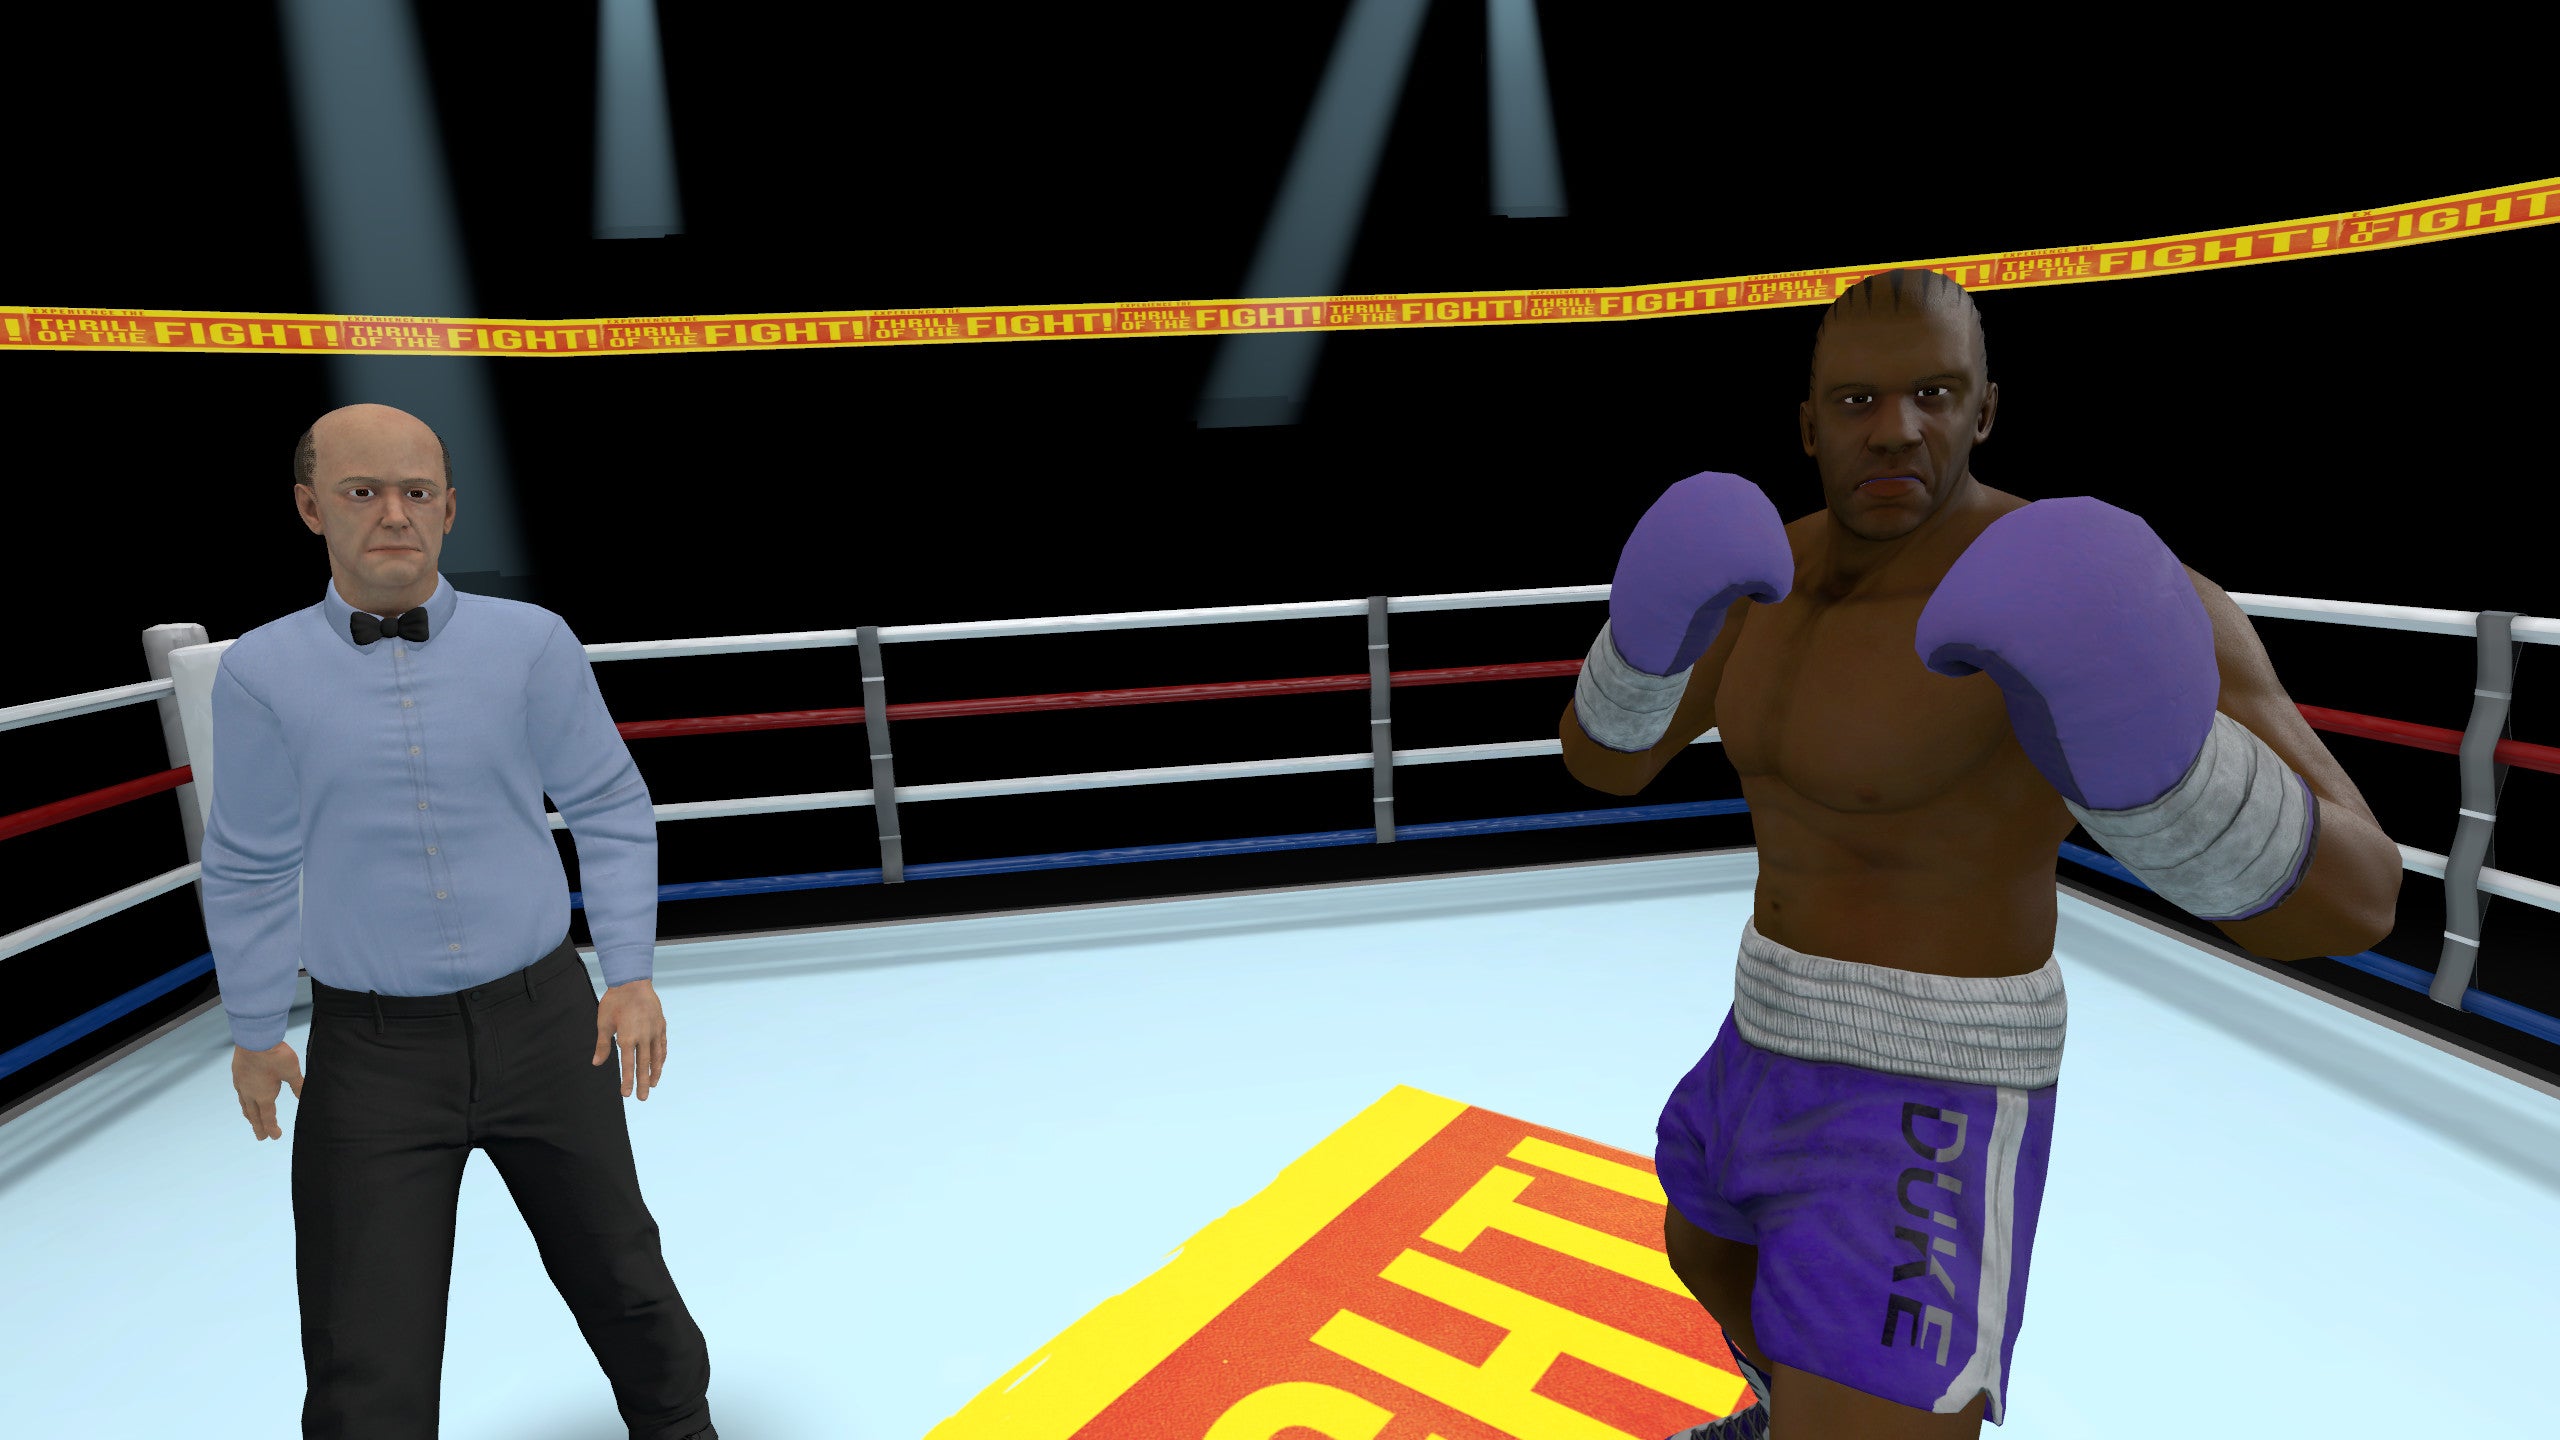 Image for VR allows the dancing side of boxing to come to life